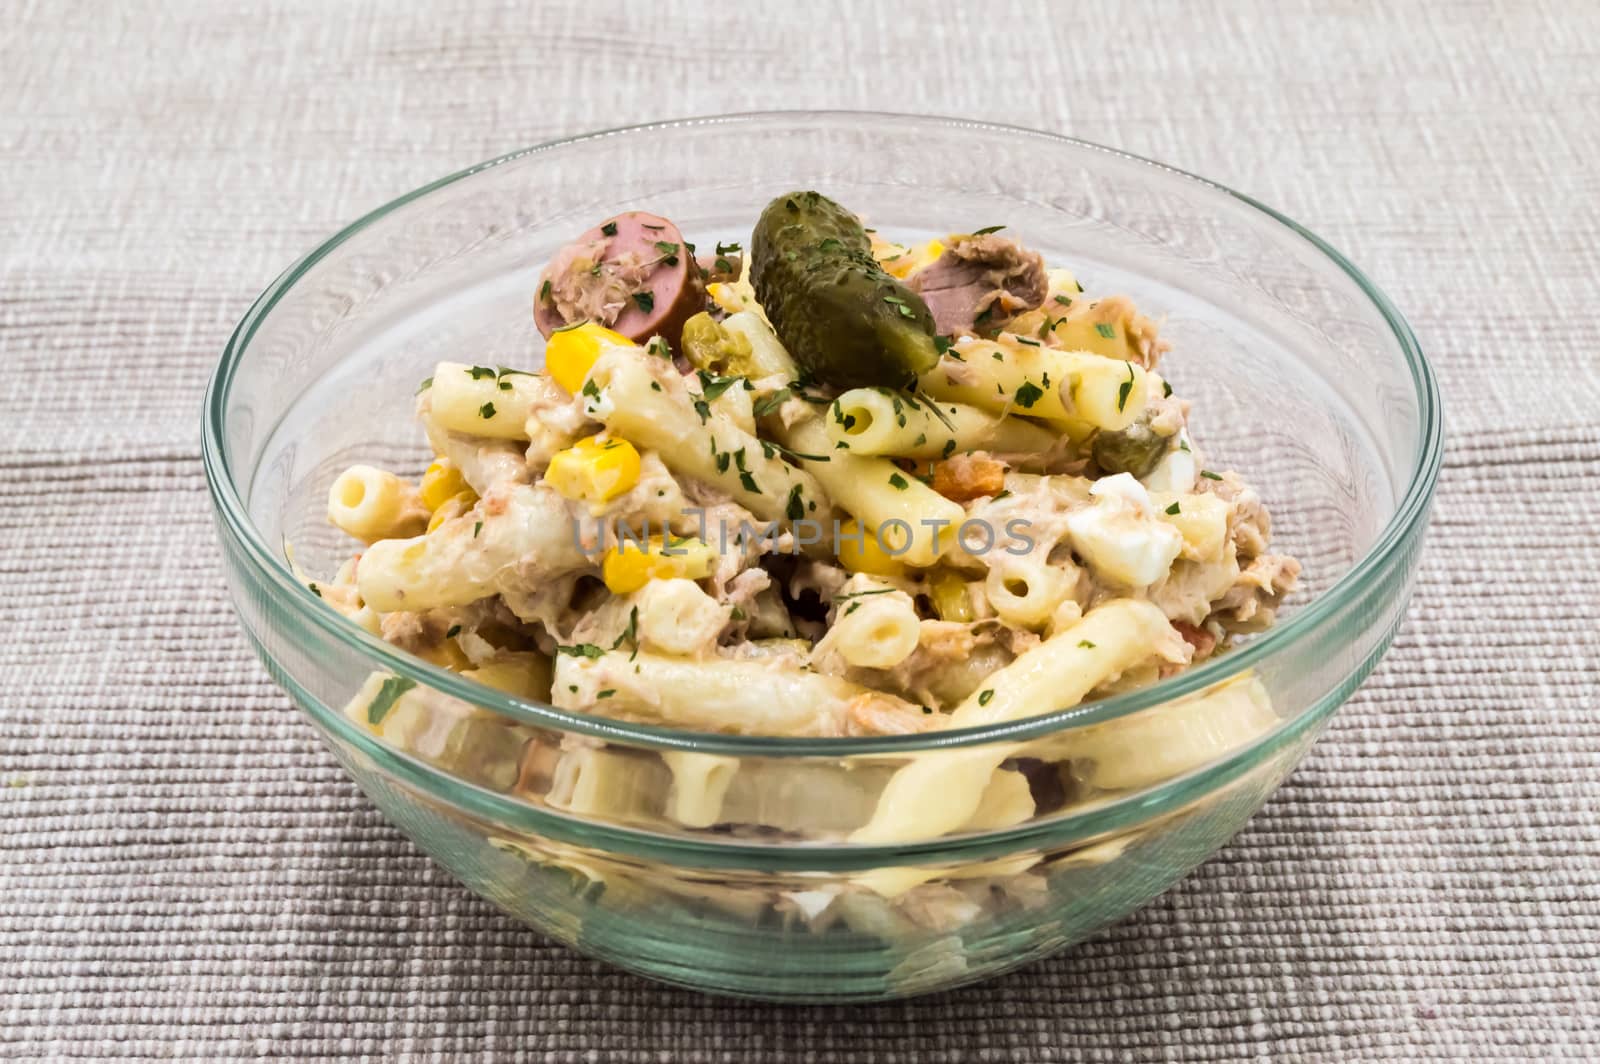 Pasta salad dish with corn, tuna and a pickle on a gray background